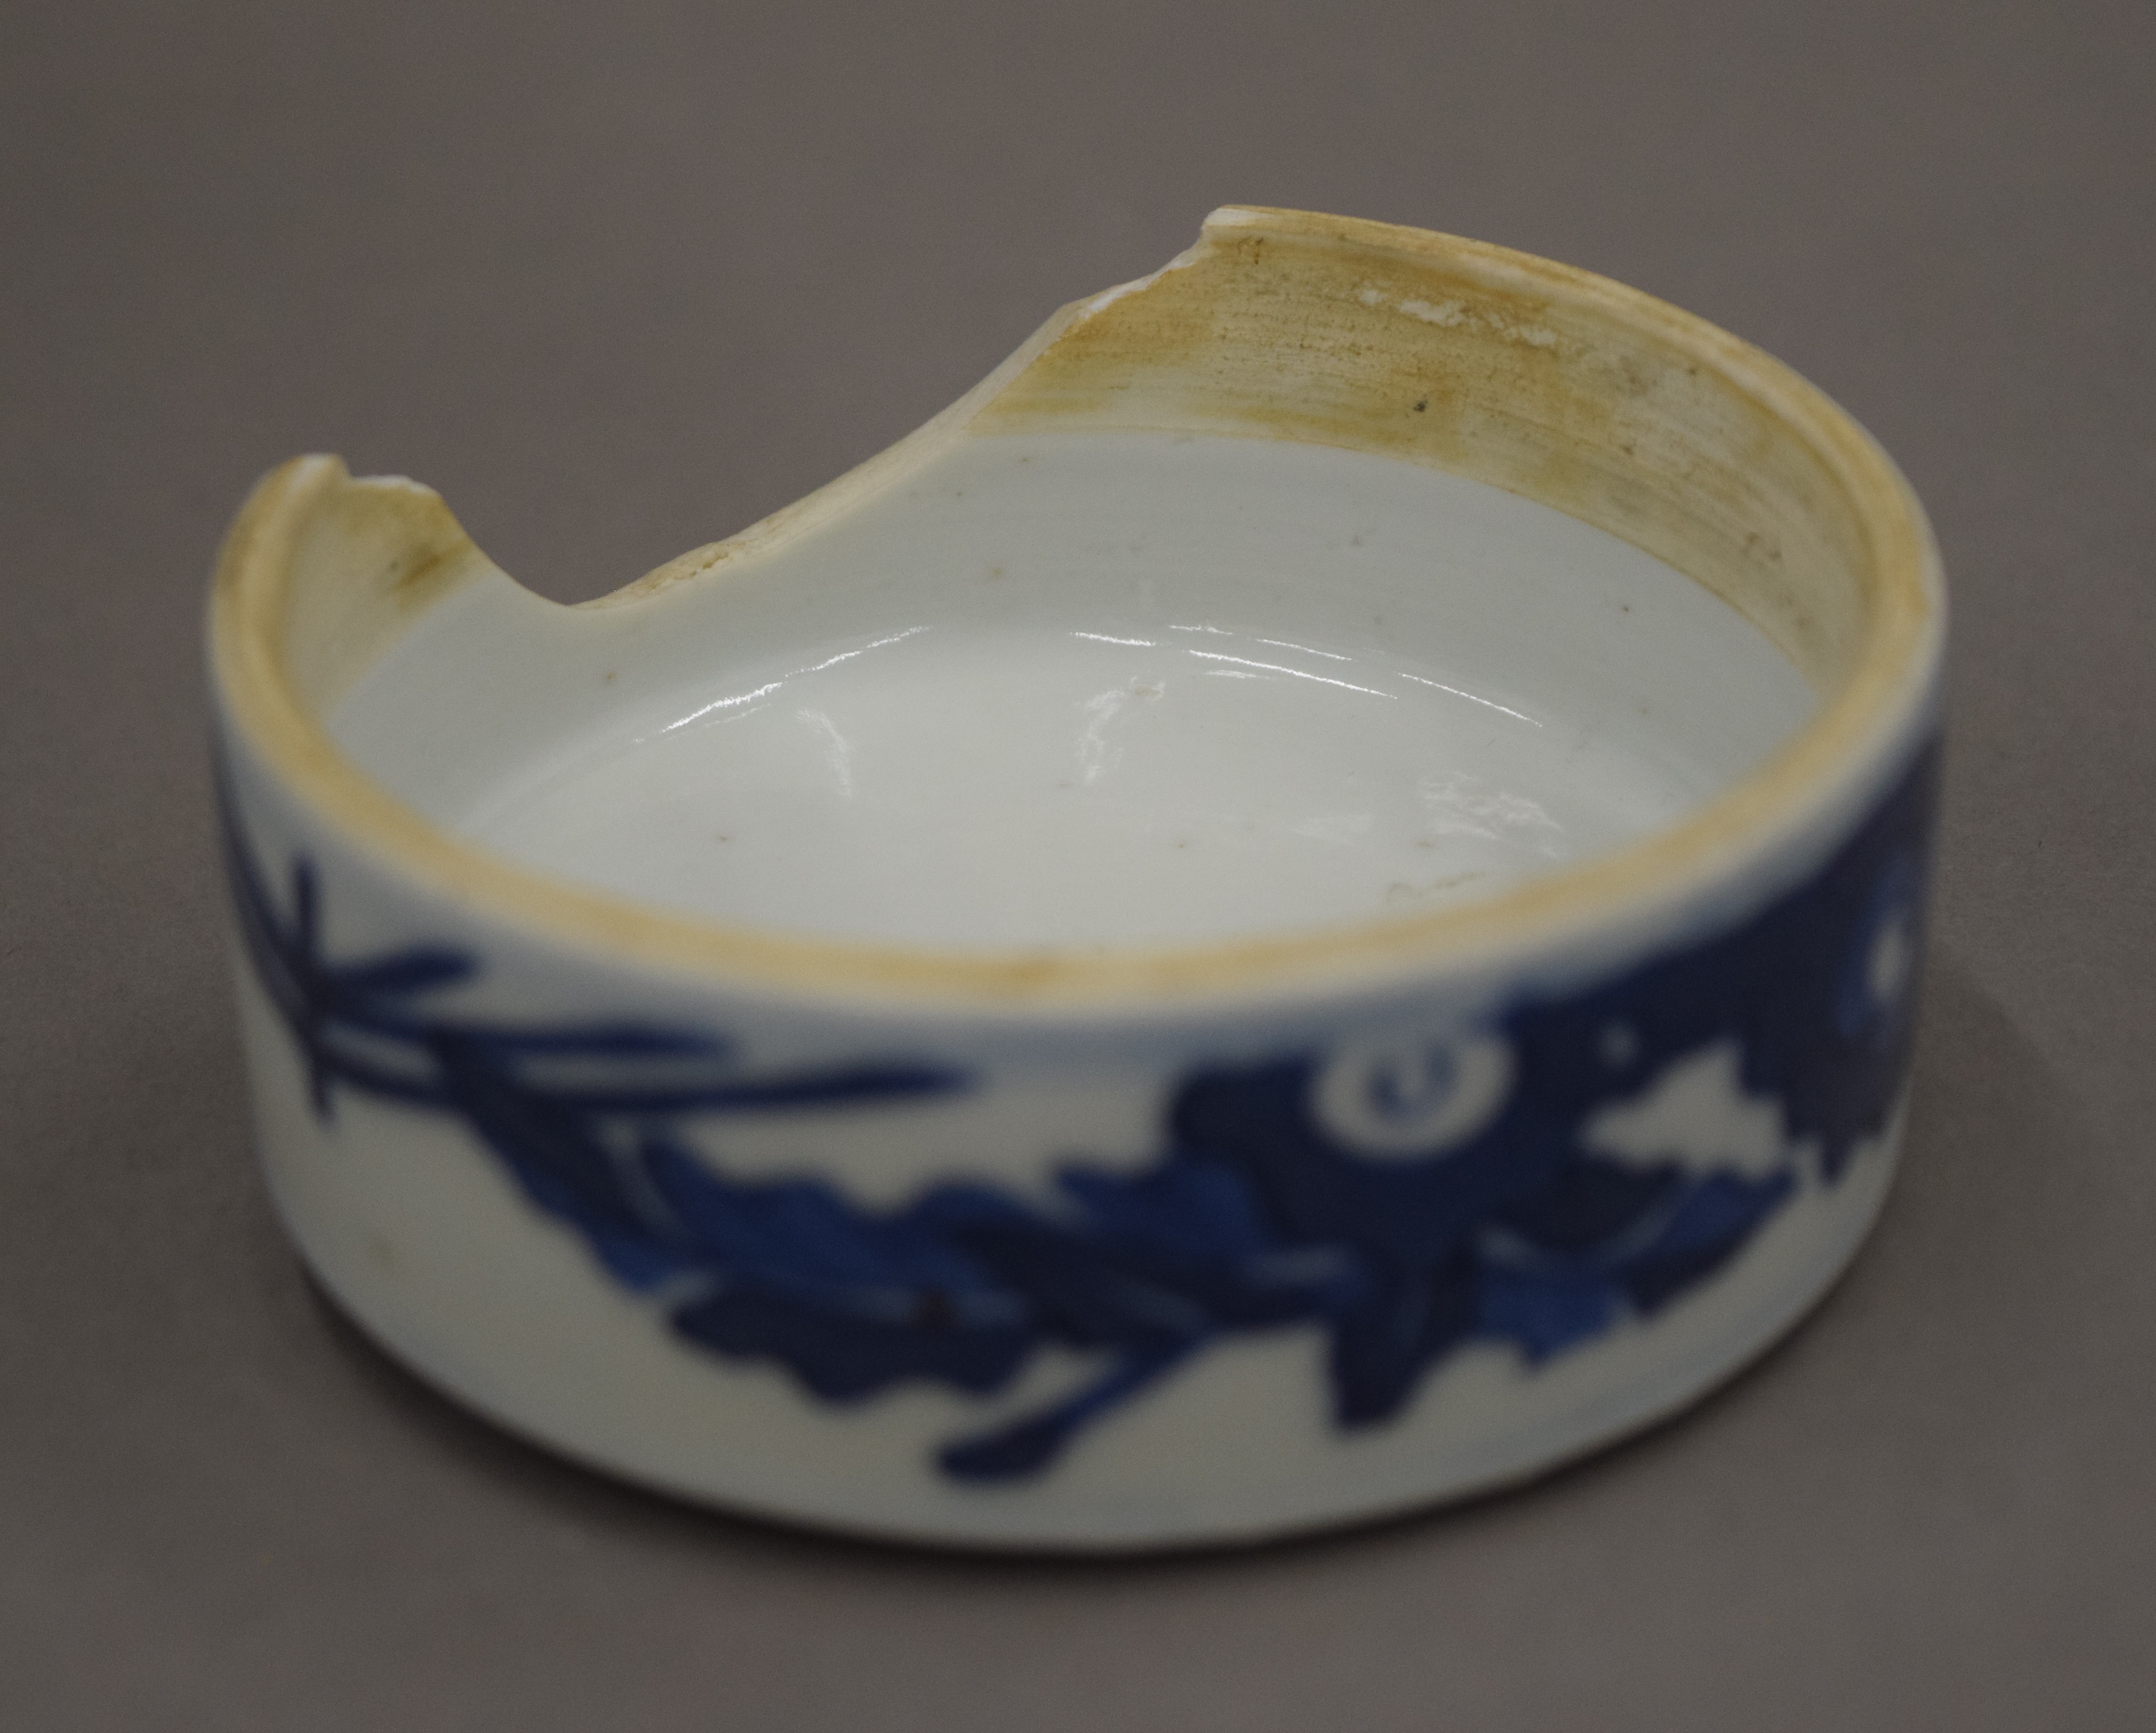 A 19th century Chinese porcelain ginger jar mounted on a wooden stand. - Image 6 of 9